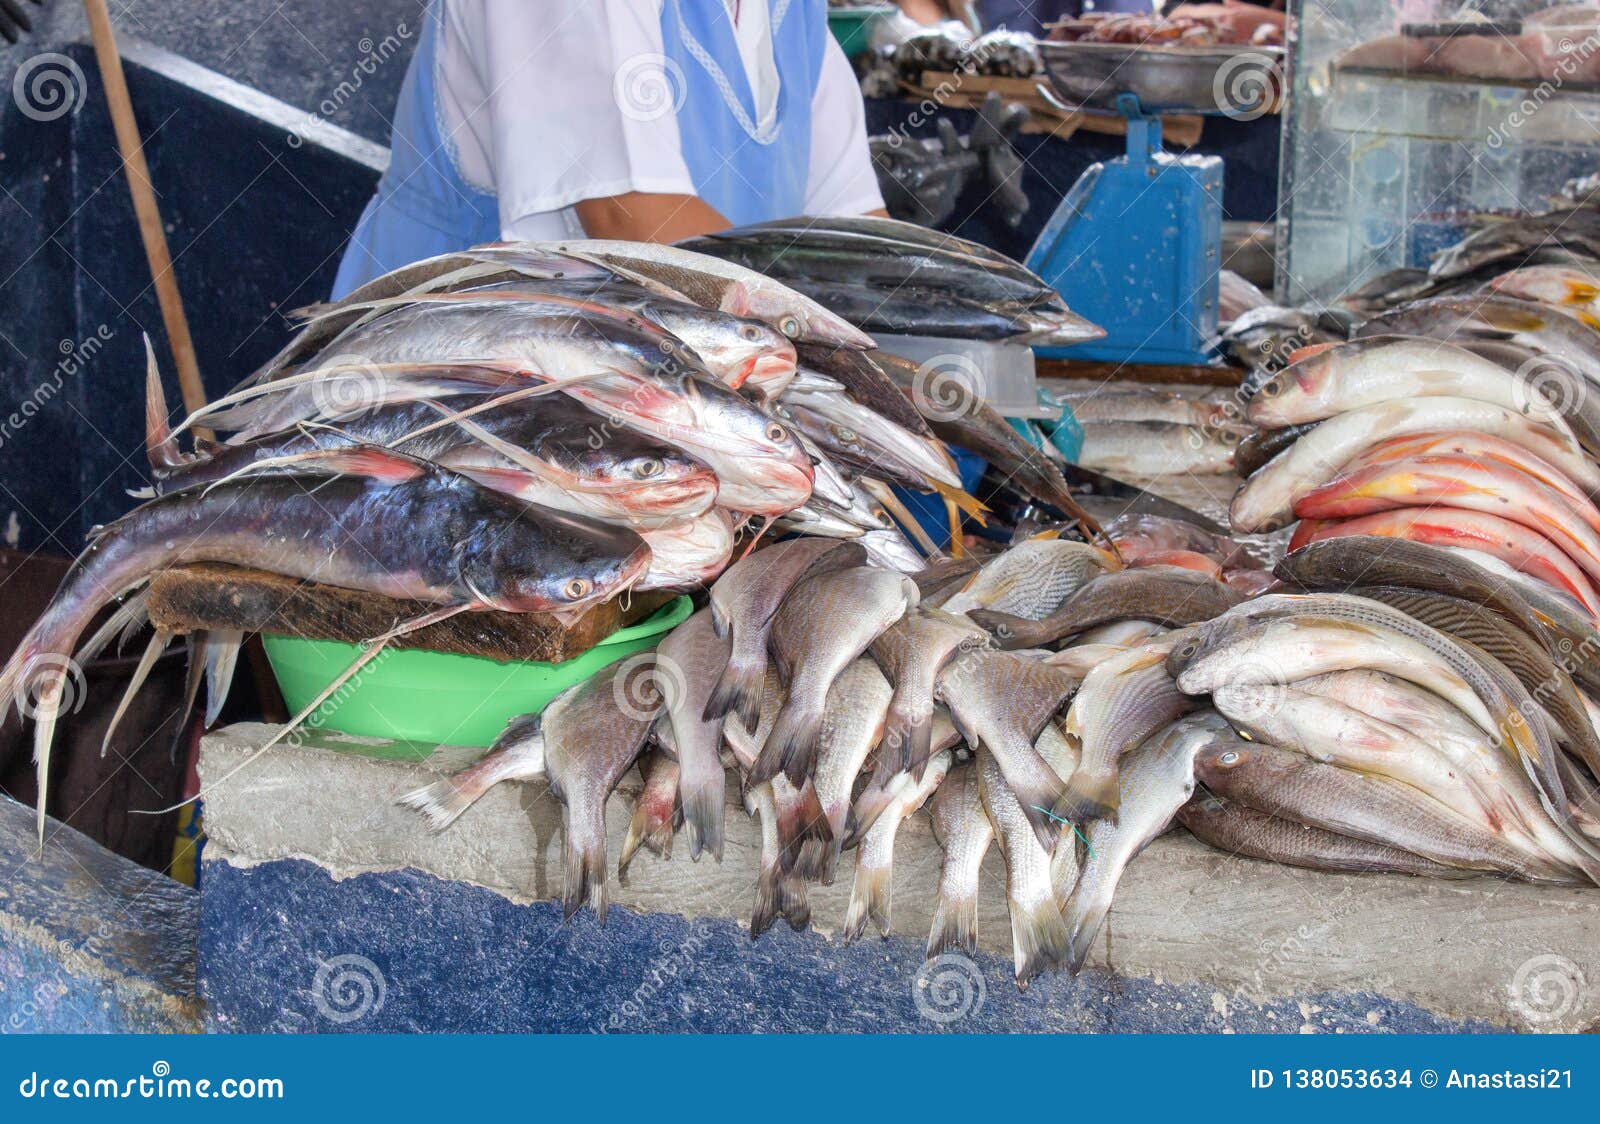 selling fish in the market. close-up. ecuador.